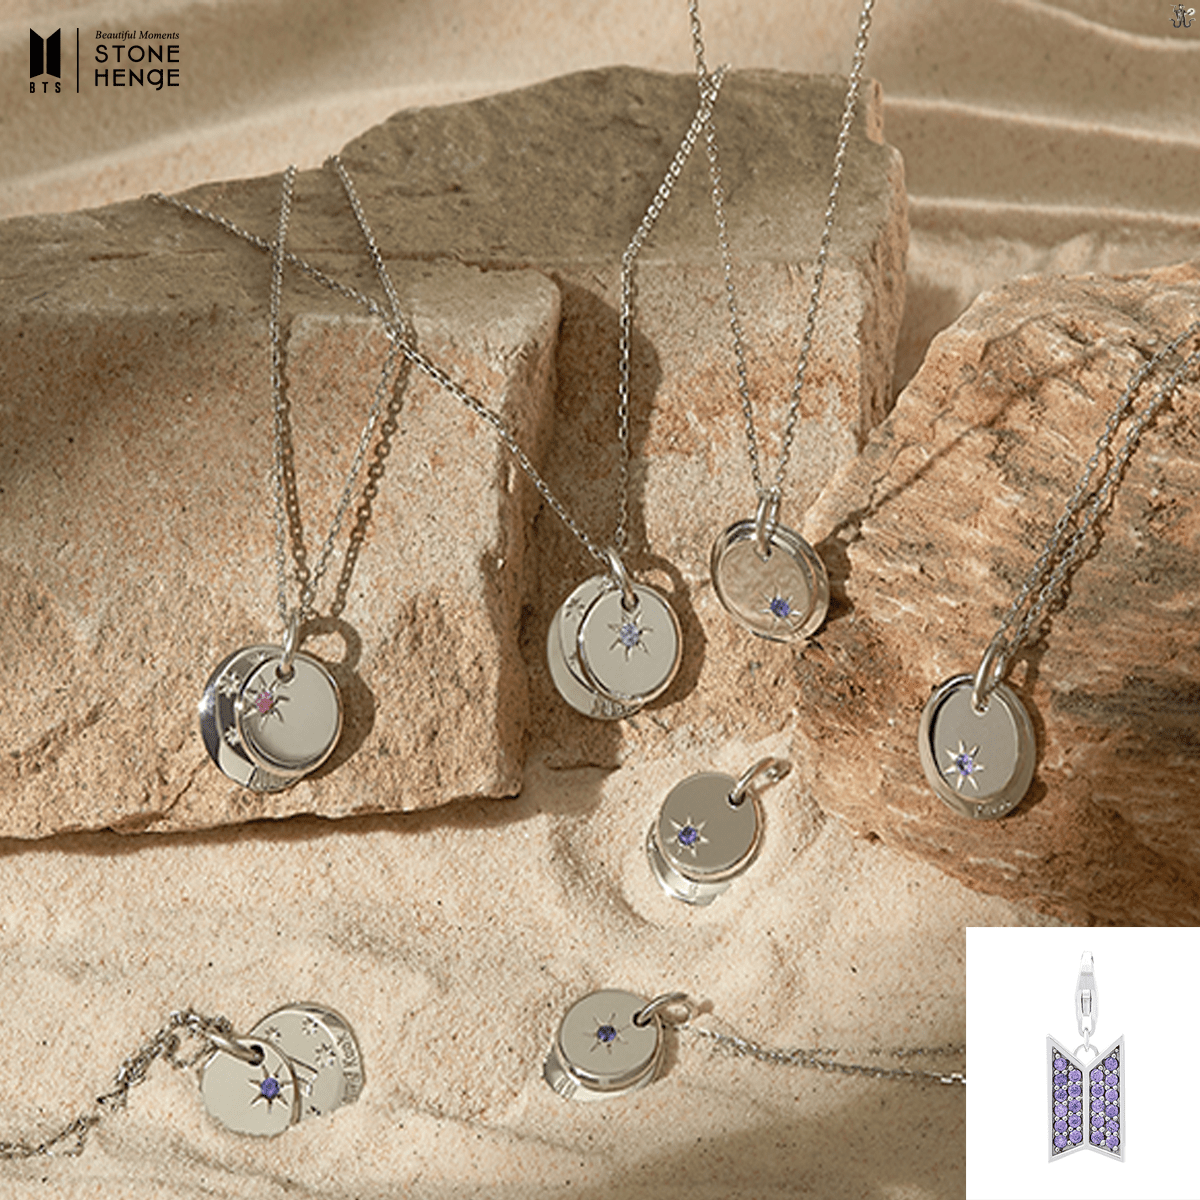 [STONEHENgE x BTS] Moment Of Light BIRTH Necklace Version (Free Shipping)